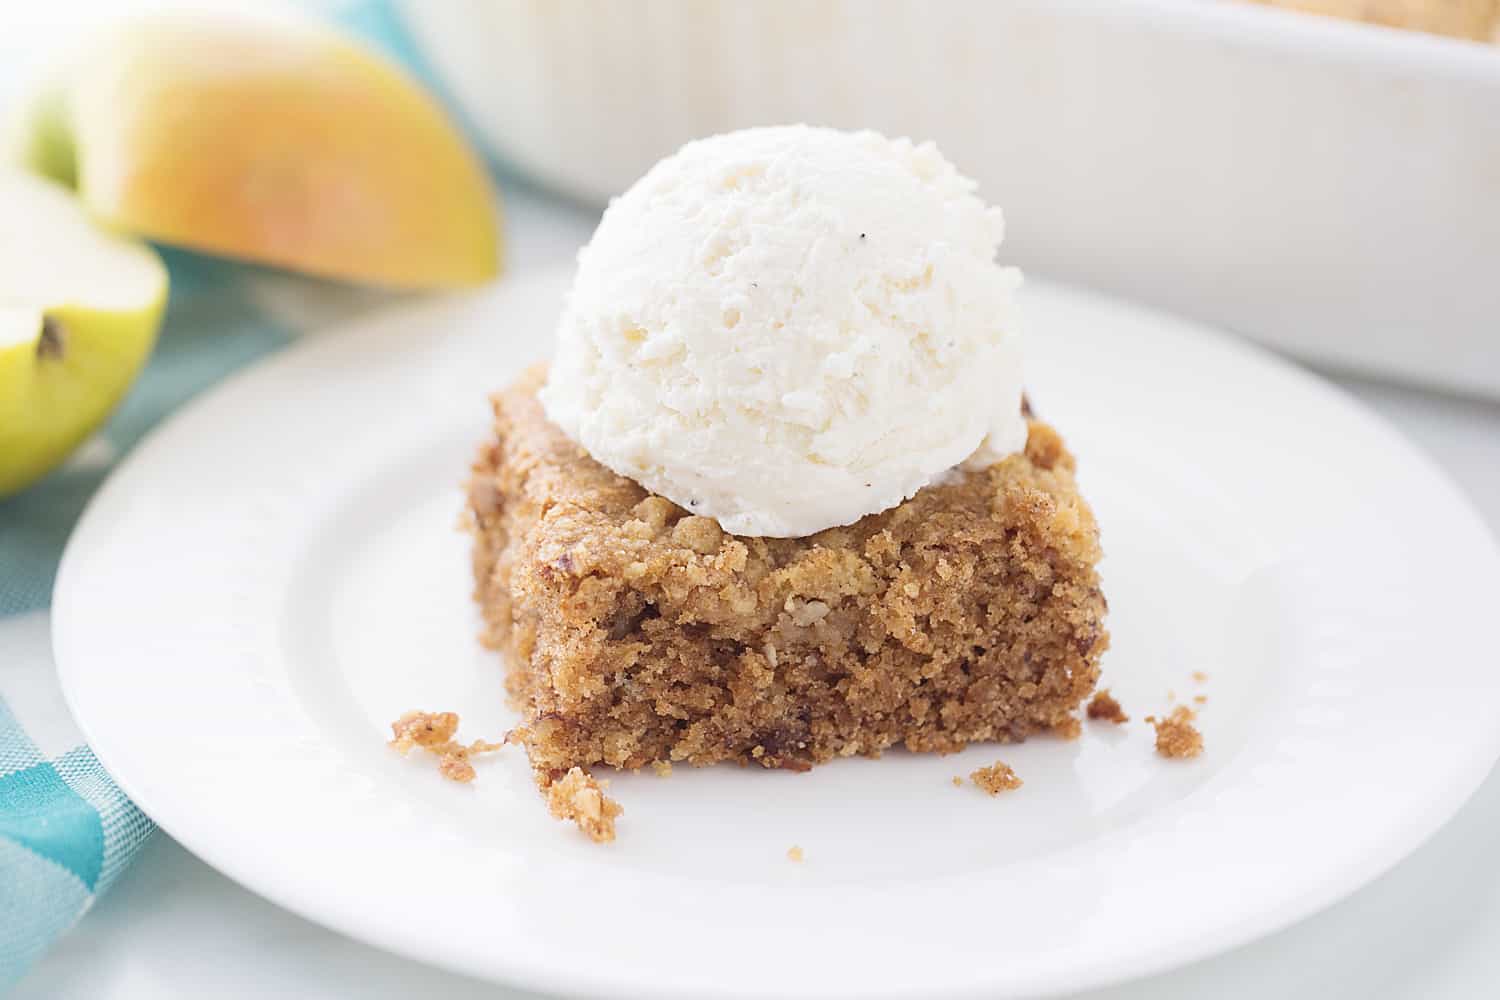 Applesauce Crunch Cake - There's applesauce cake and then there's applesauce CRUNCH cake. Why go for ordinary when you can opt for extraordinary with a crunchy topping? #cake #dessert #applesaucecake #easyrecipe #baking #sweets #easycake #cakerecipe #HalfScratched